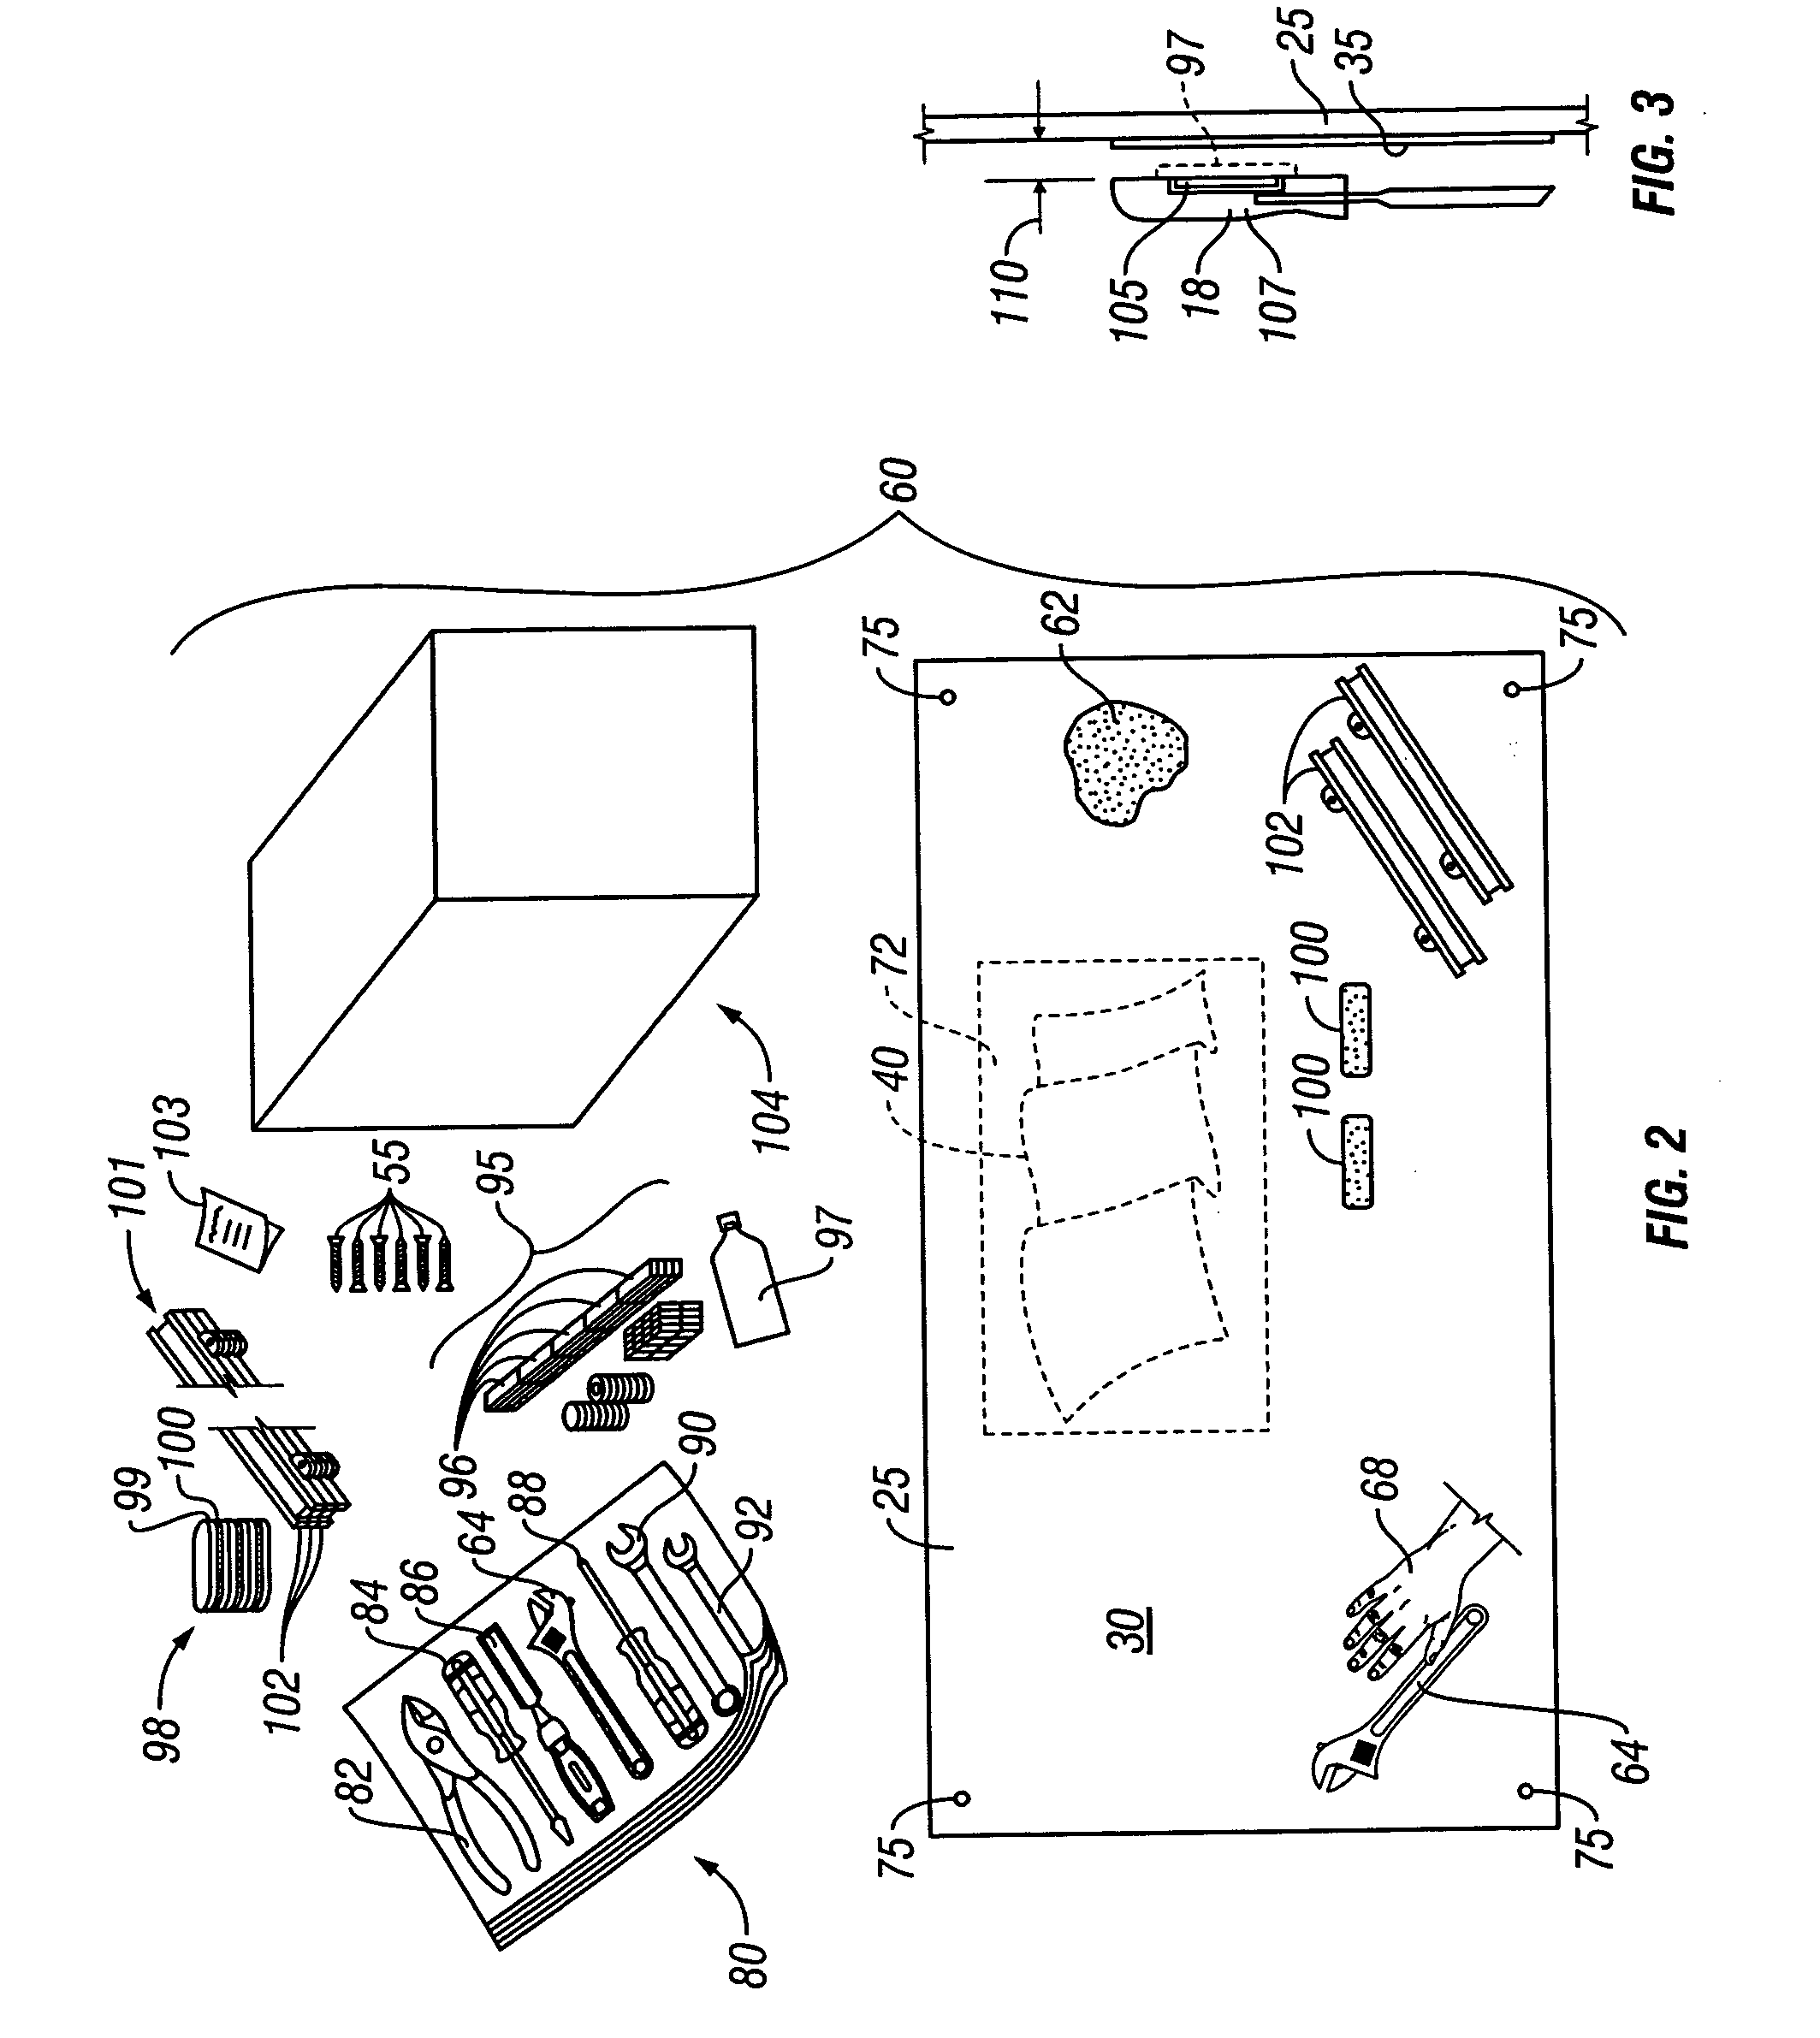 Tool attachment and organizer system and methods